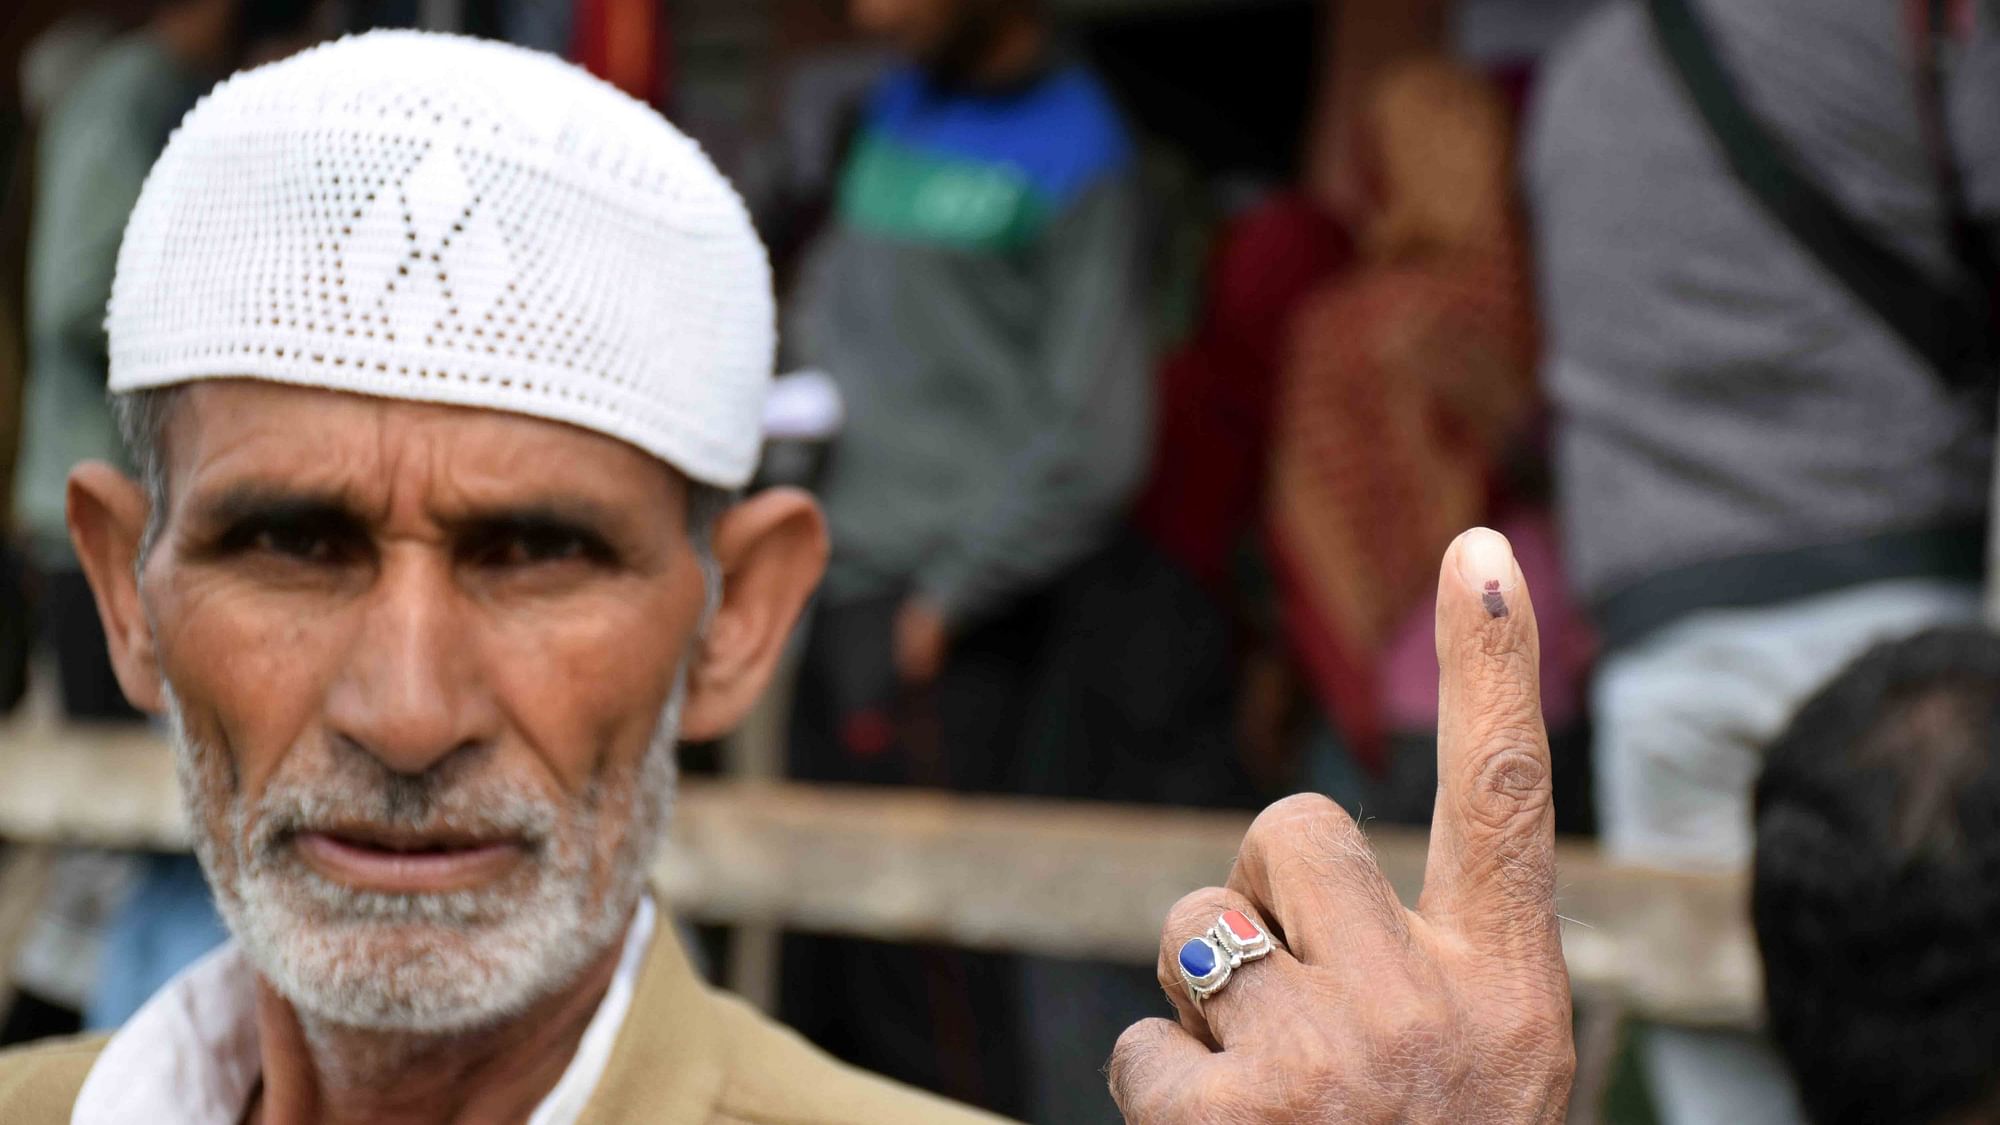 A voter showcases the inked finger after casting his vote in Baramulla